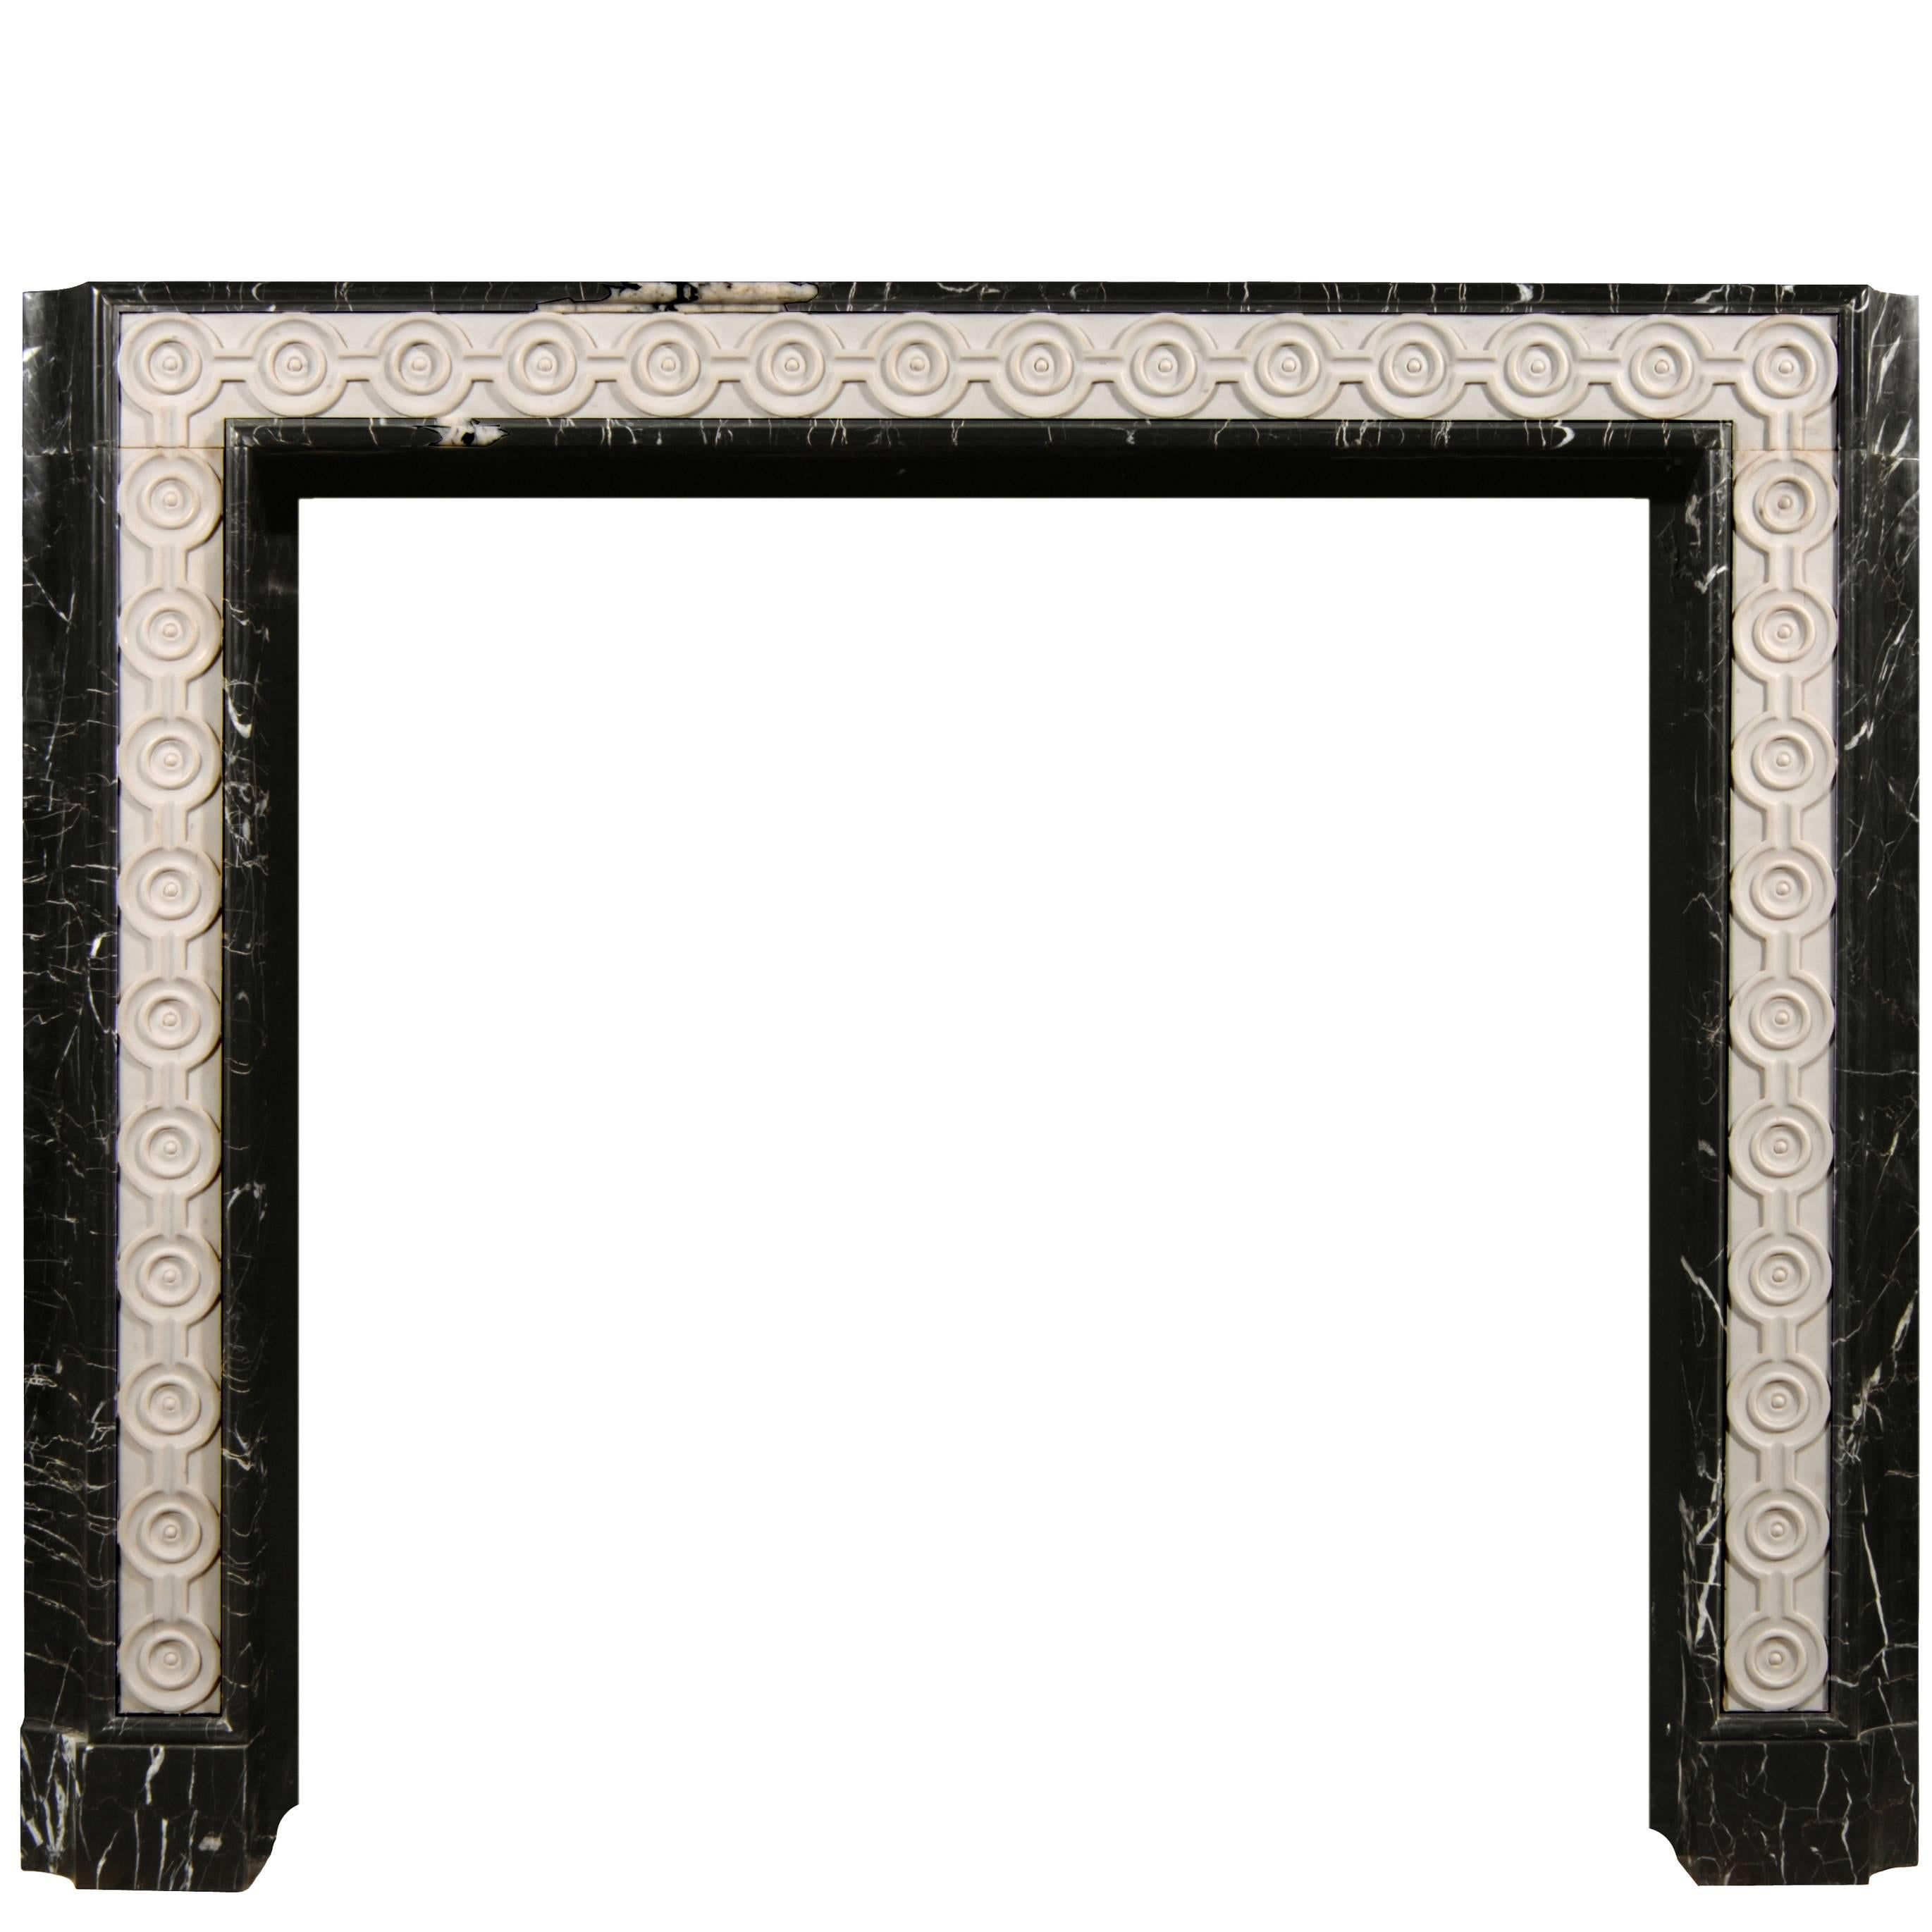 English Nero Marquina Marble Fireplace with Inlaid Statuary